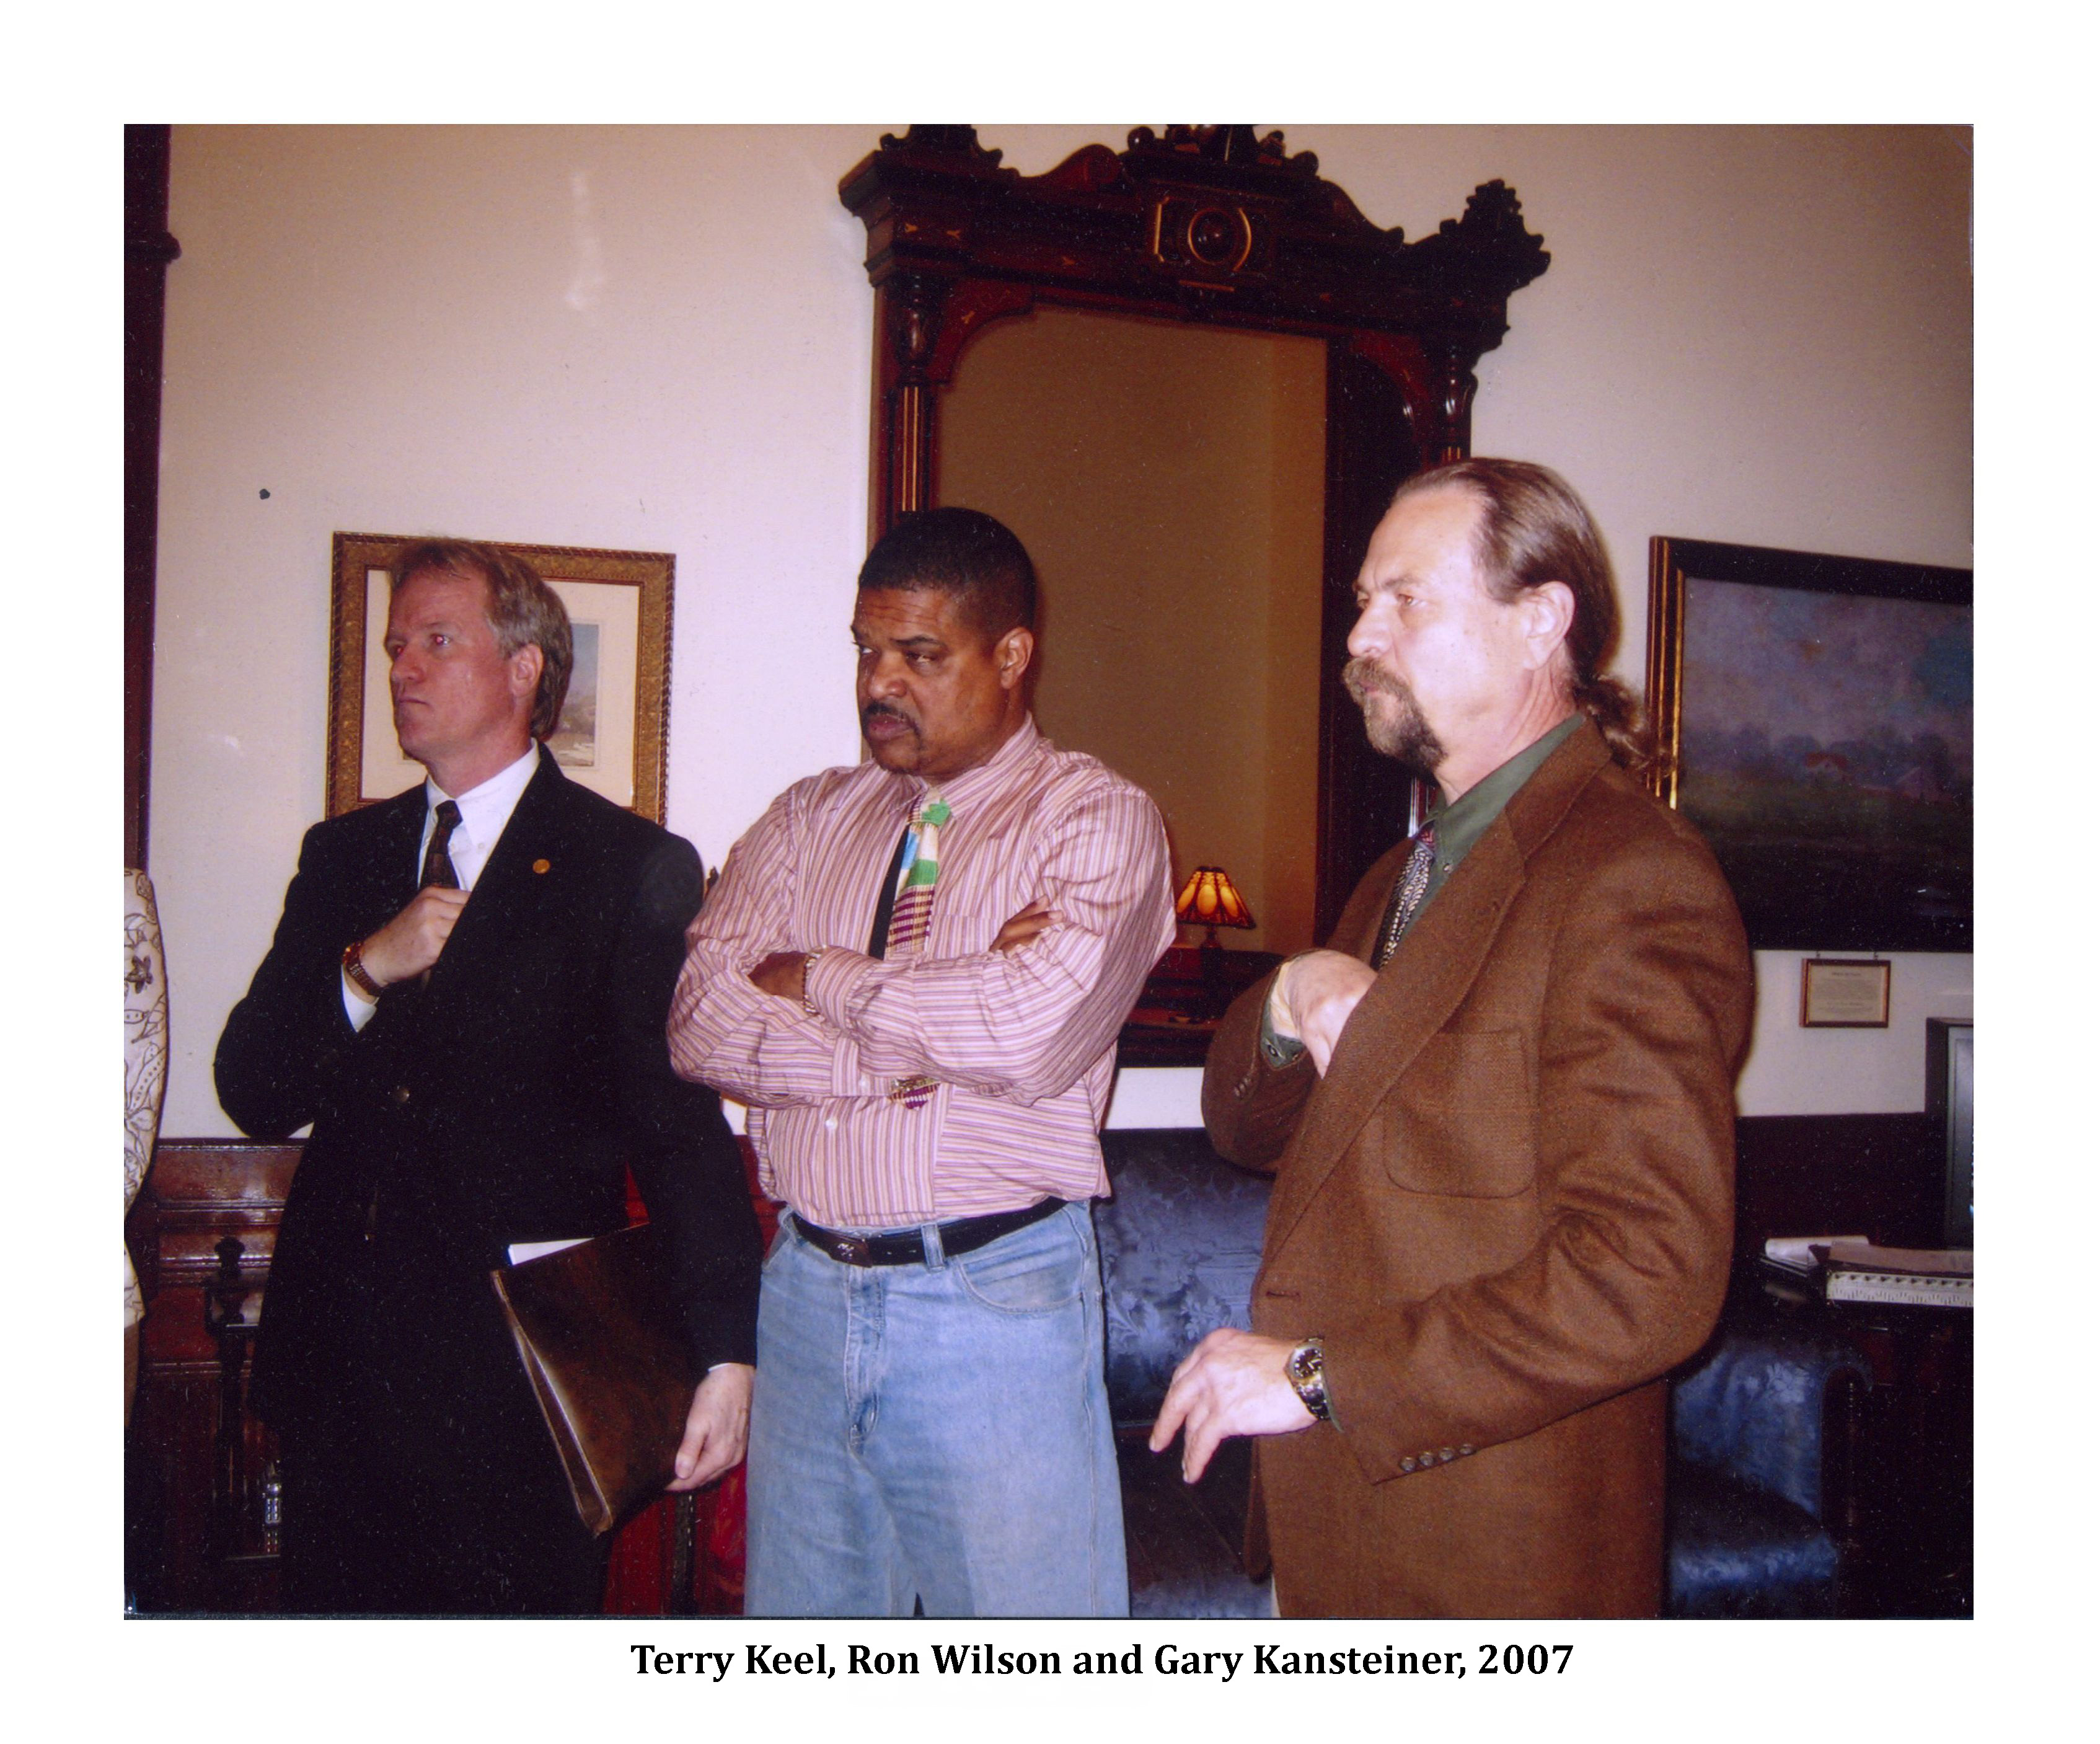 Terry Keel, Ron Wilson and Gary Kansteiner, 2007. Photo courtesy of Terry Keel